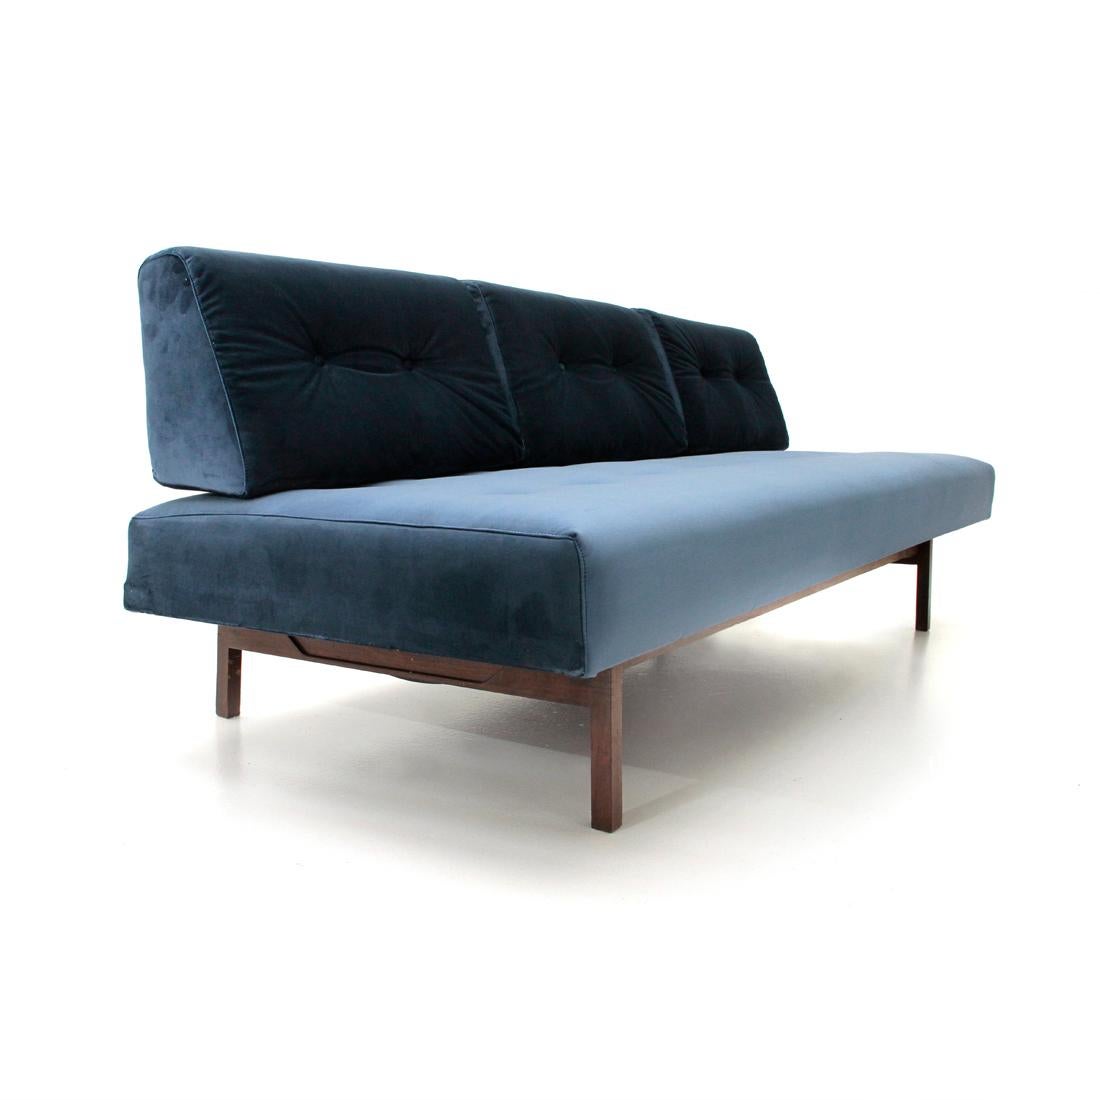 Sofa produced by Cassina designed by Gianfranco Frattini in the 50s.
Solid wood frame with visible joints.
Seat in wood and metal padded and lined with new velvet fabric with stitching.
Backrest formed by three removable cushions, padded and